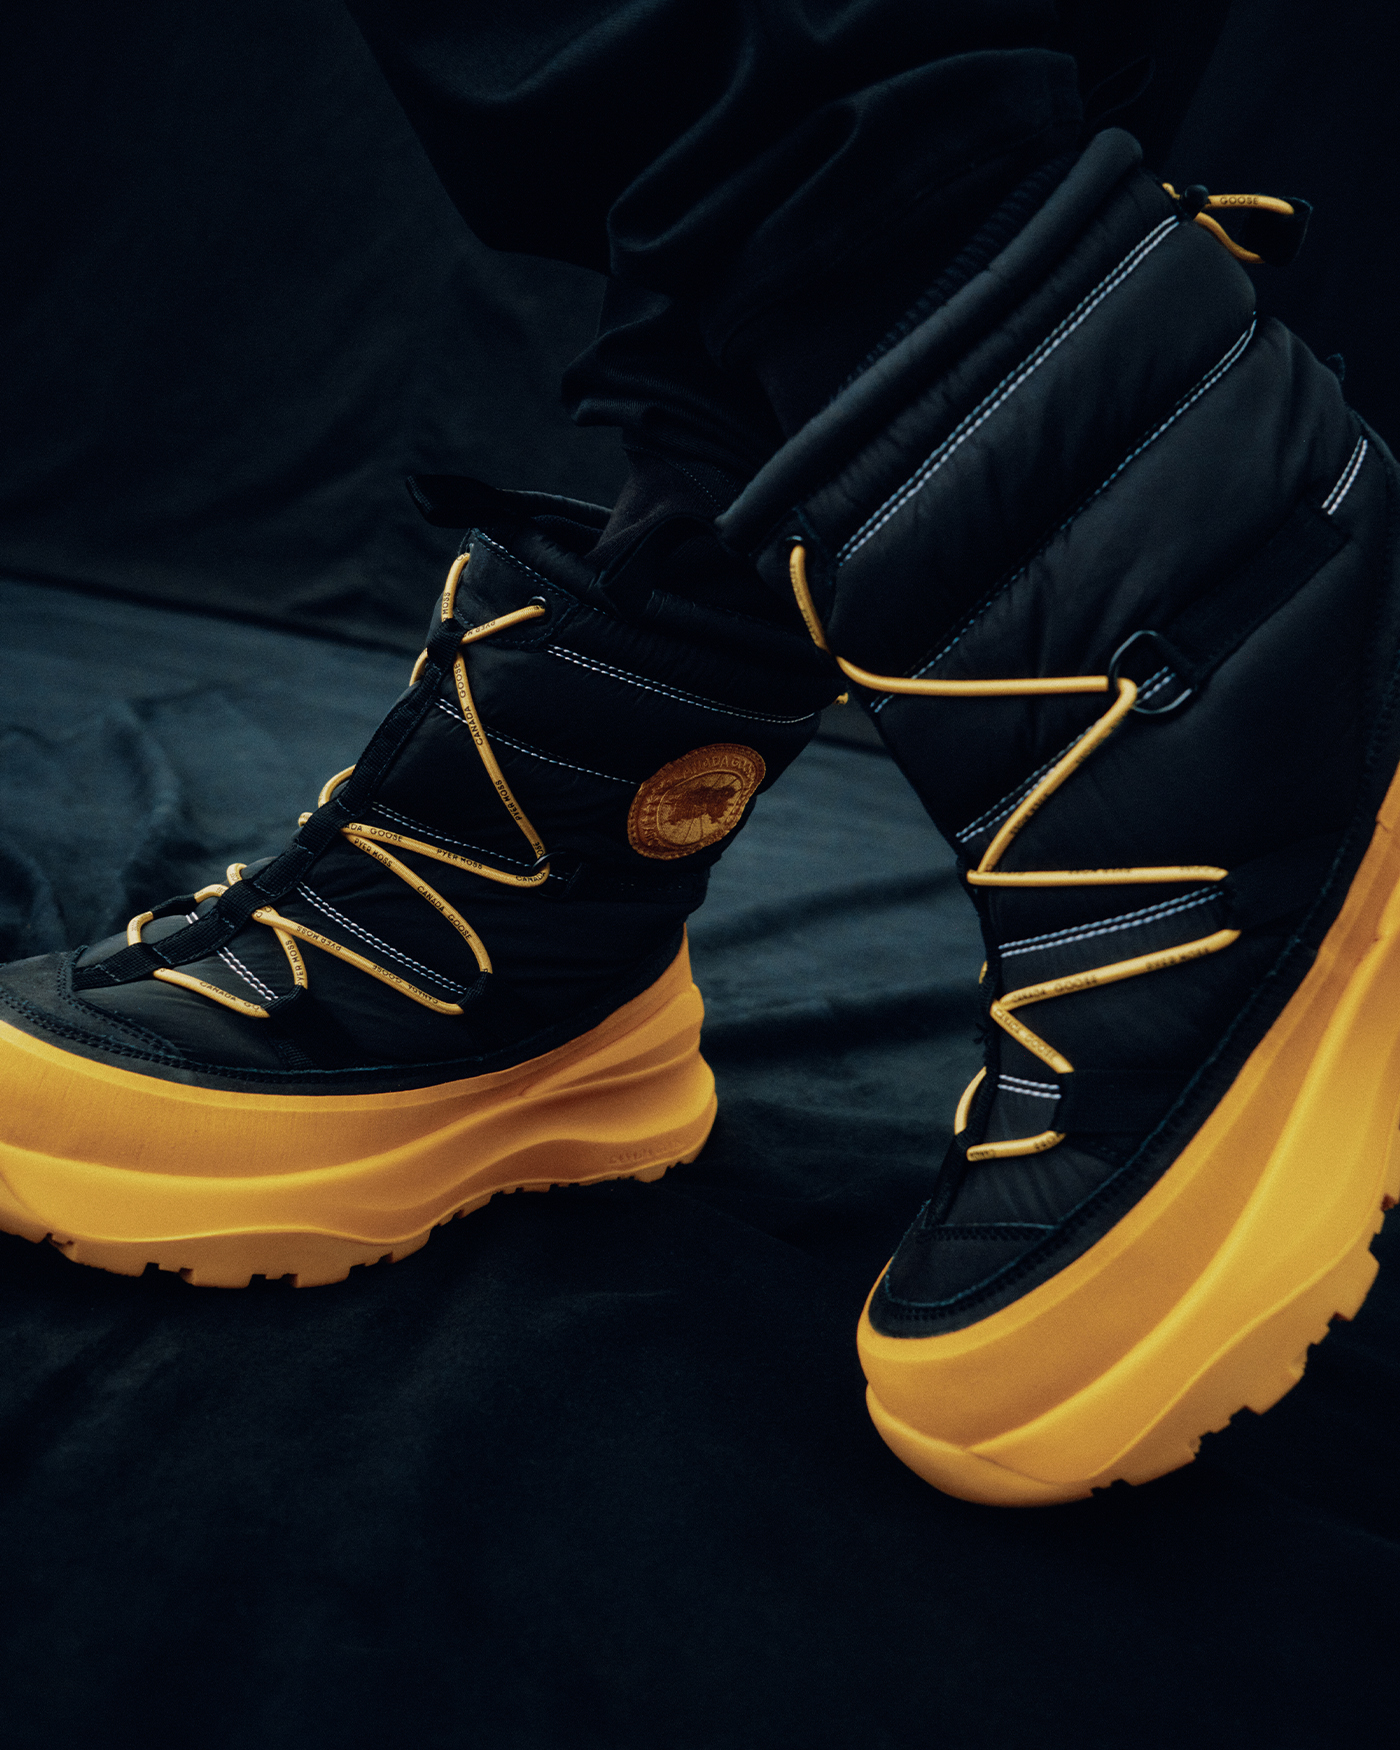 Book for Men Fall Winter fashion photoshoot black and yellow boots